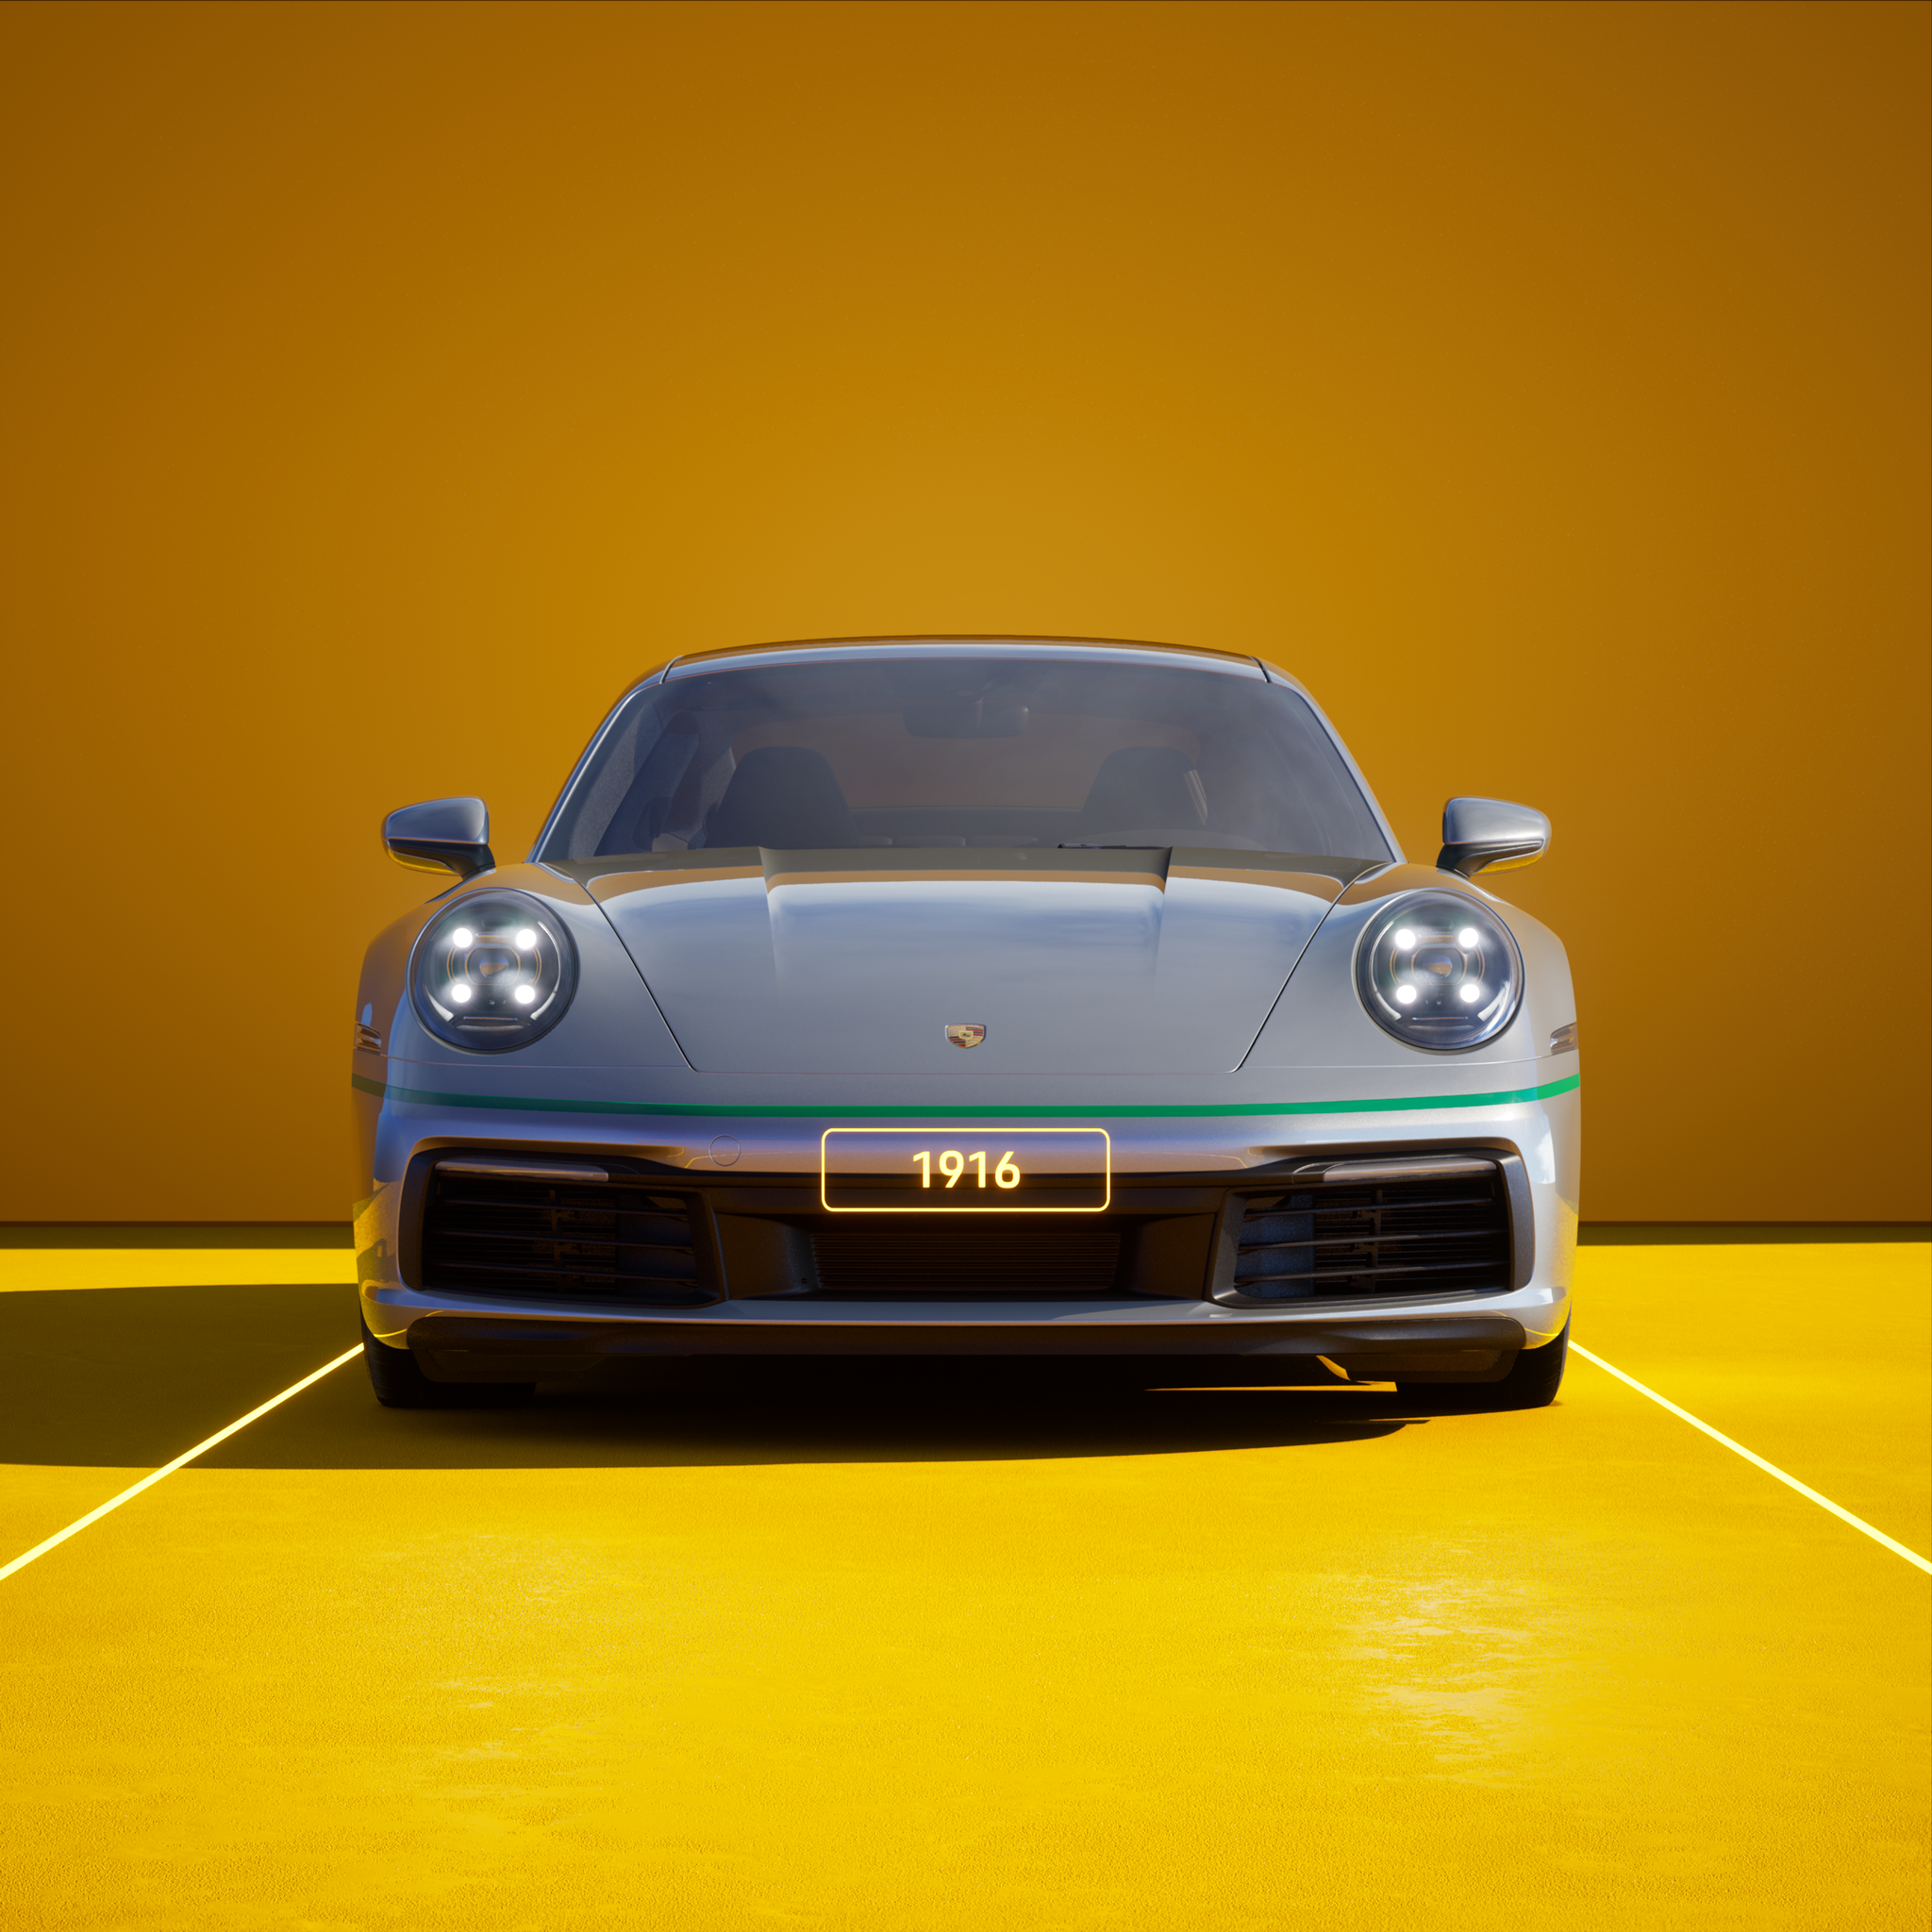 The PORSCHΞ 911 1916 image in phase